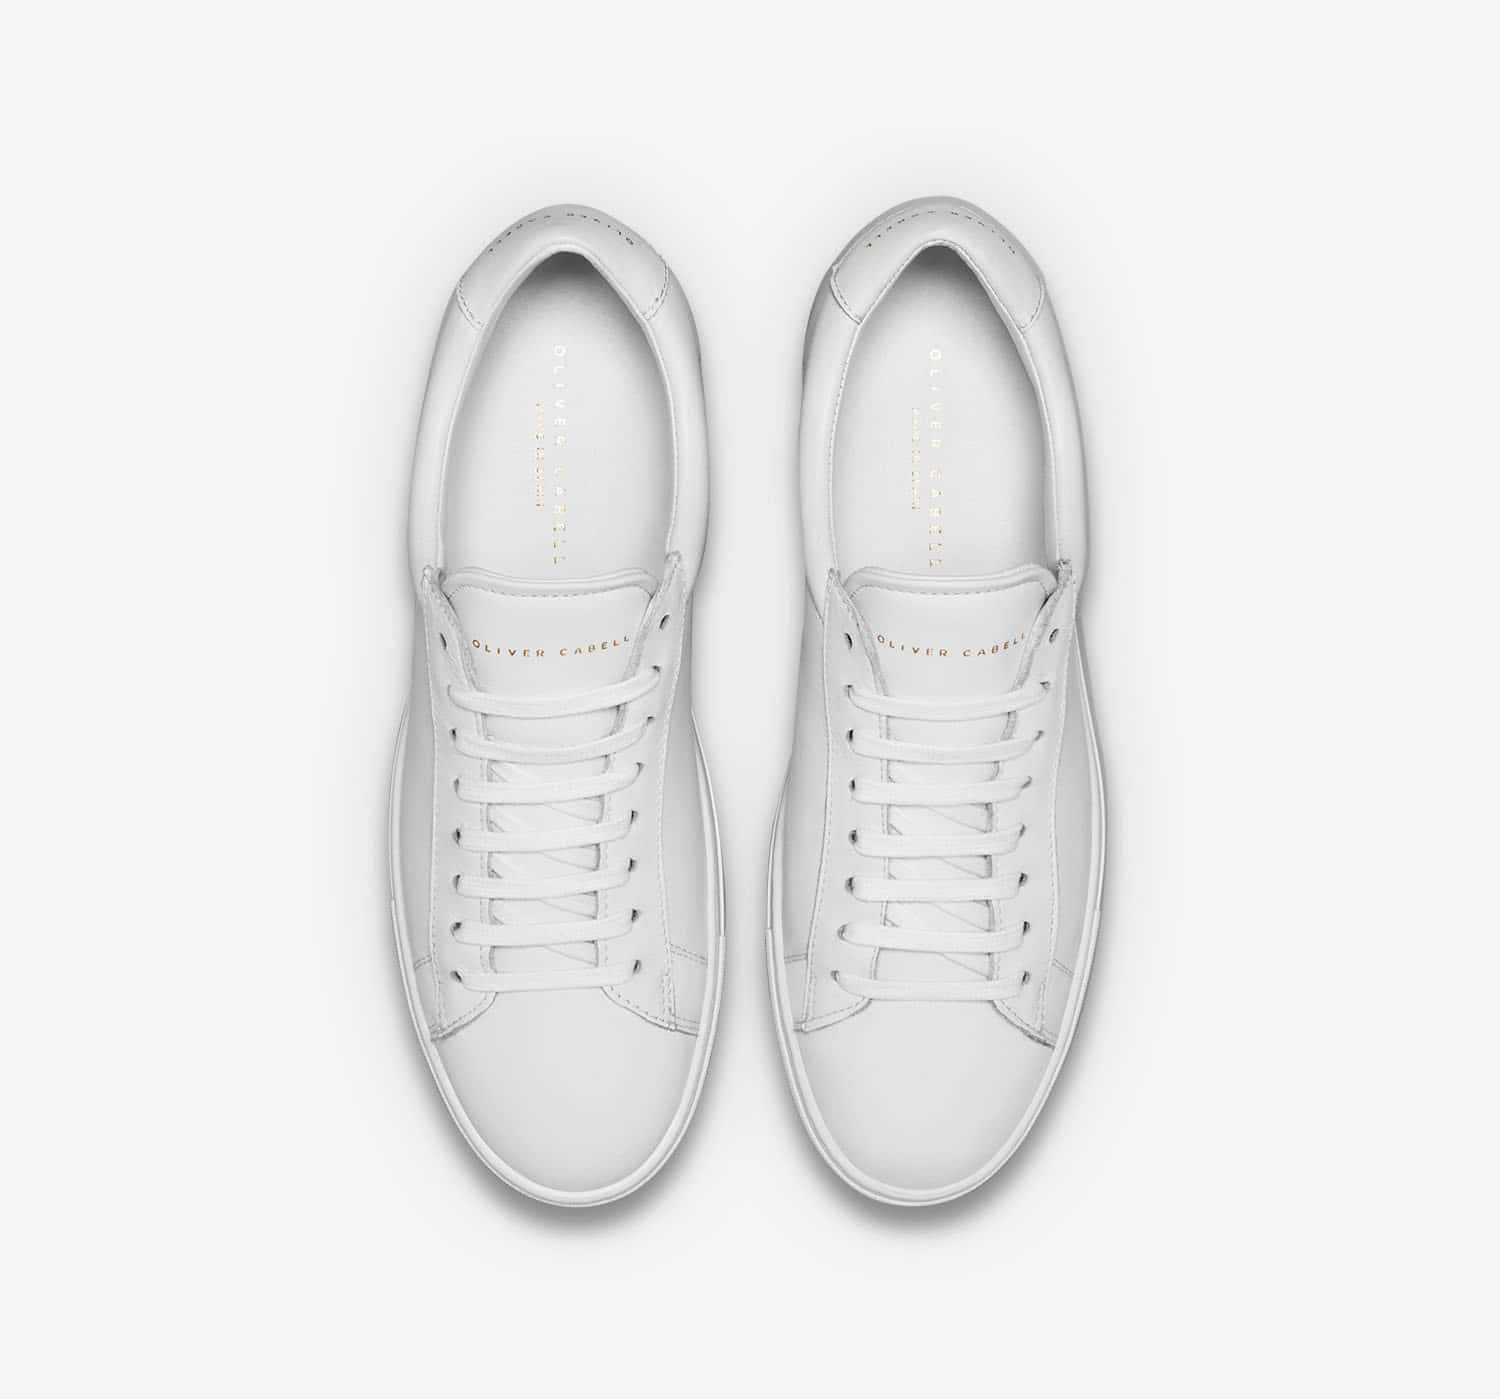 stan smith vs common projects